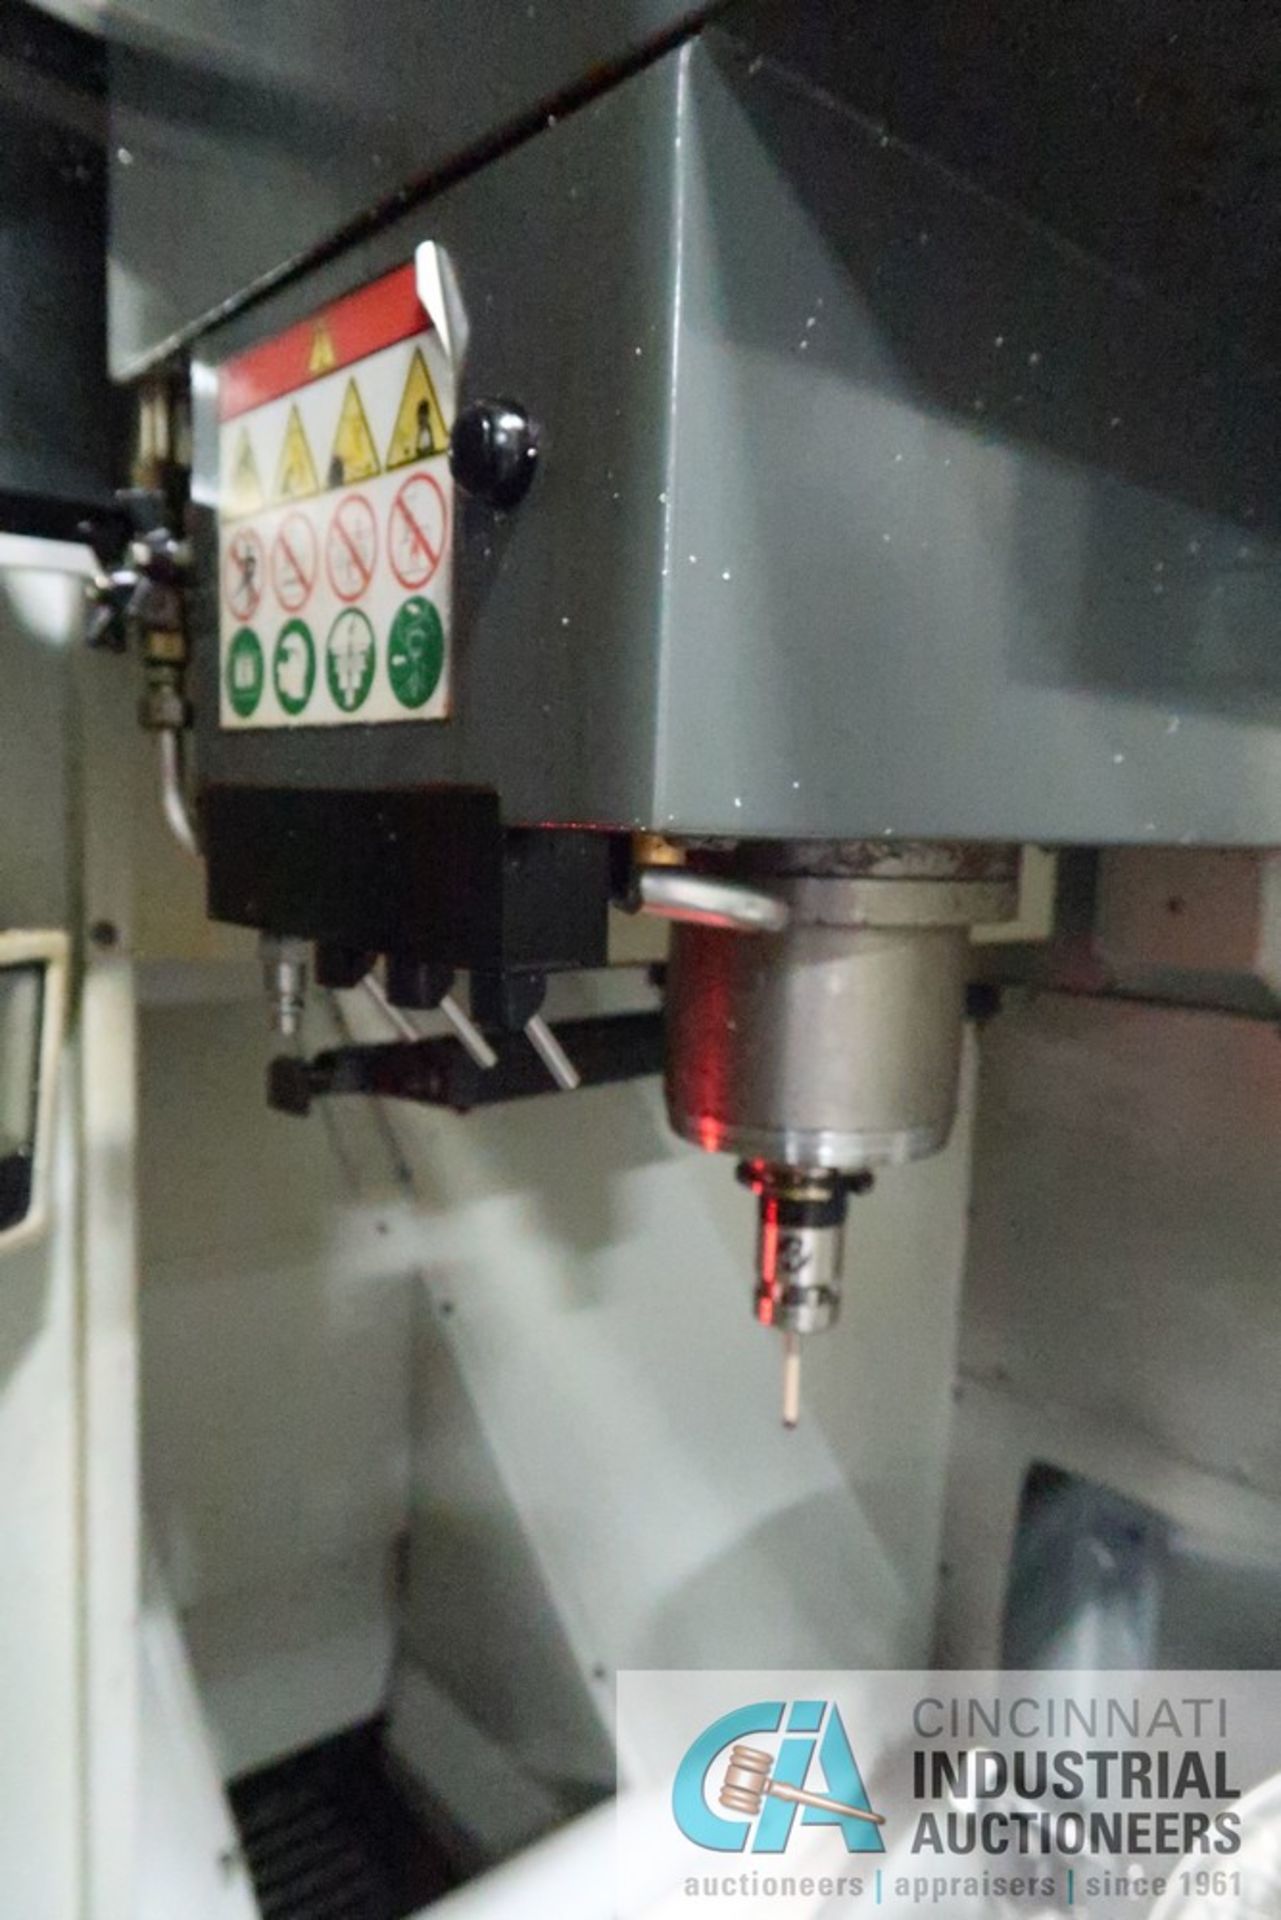 Haas Model UMC-750 Five-Axis CNC Universal Machining Center (2017) 6,578 Cutting Hours Showing - Image 8 of 19